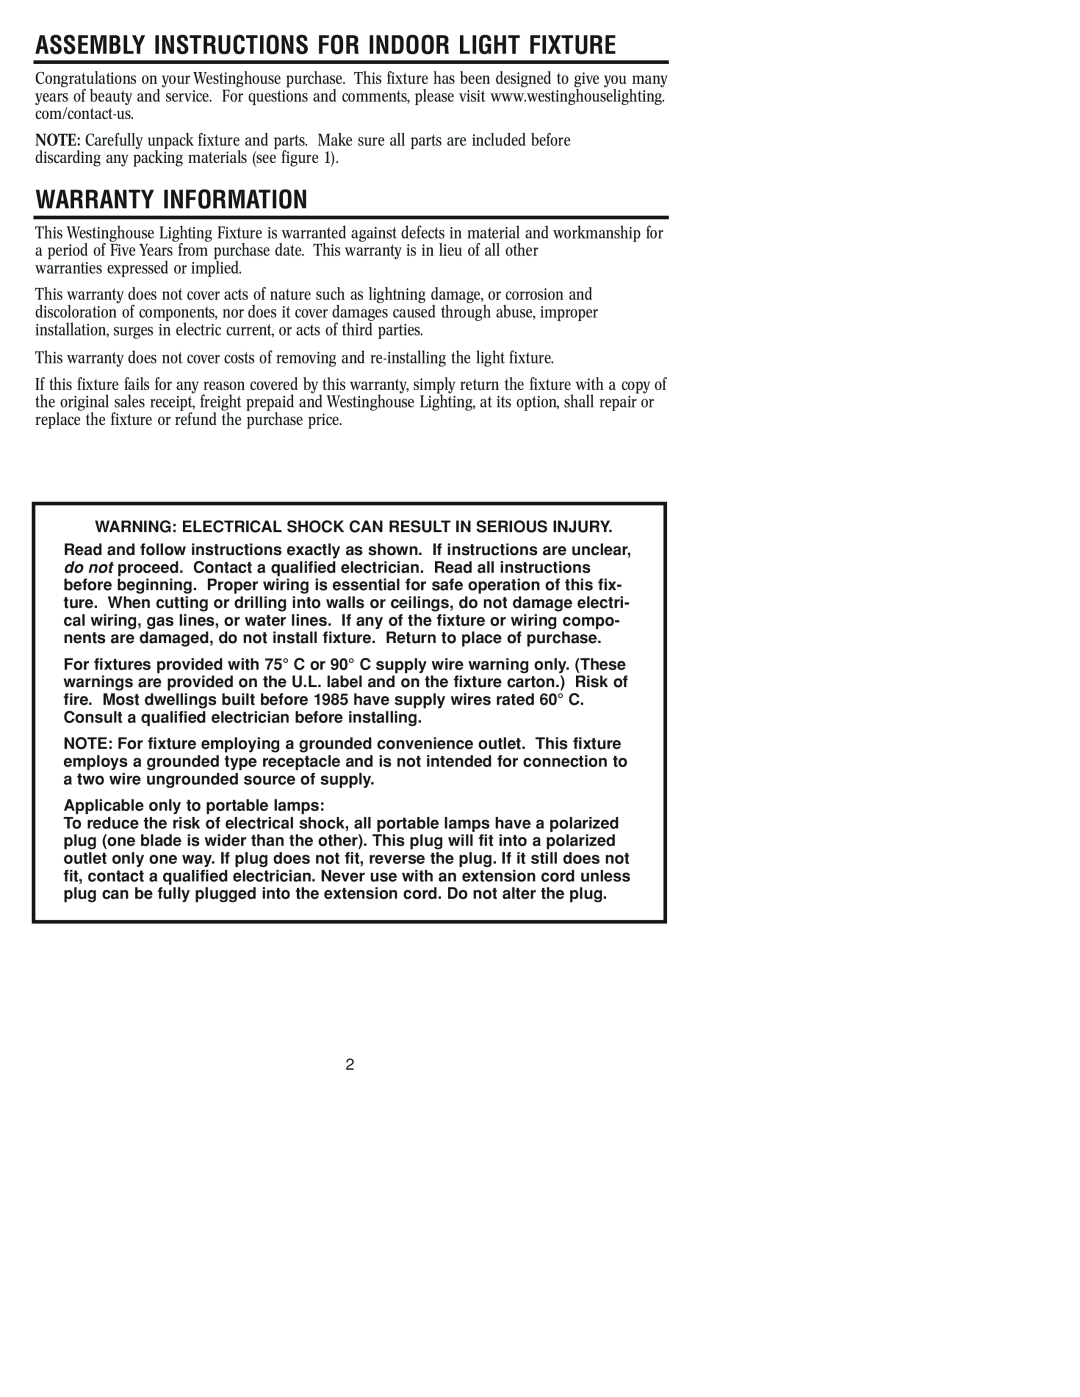 Westinghouse W-107 owner manual Warranty Information, Assembly Instructions For Indoor Light Fixture 